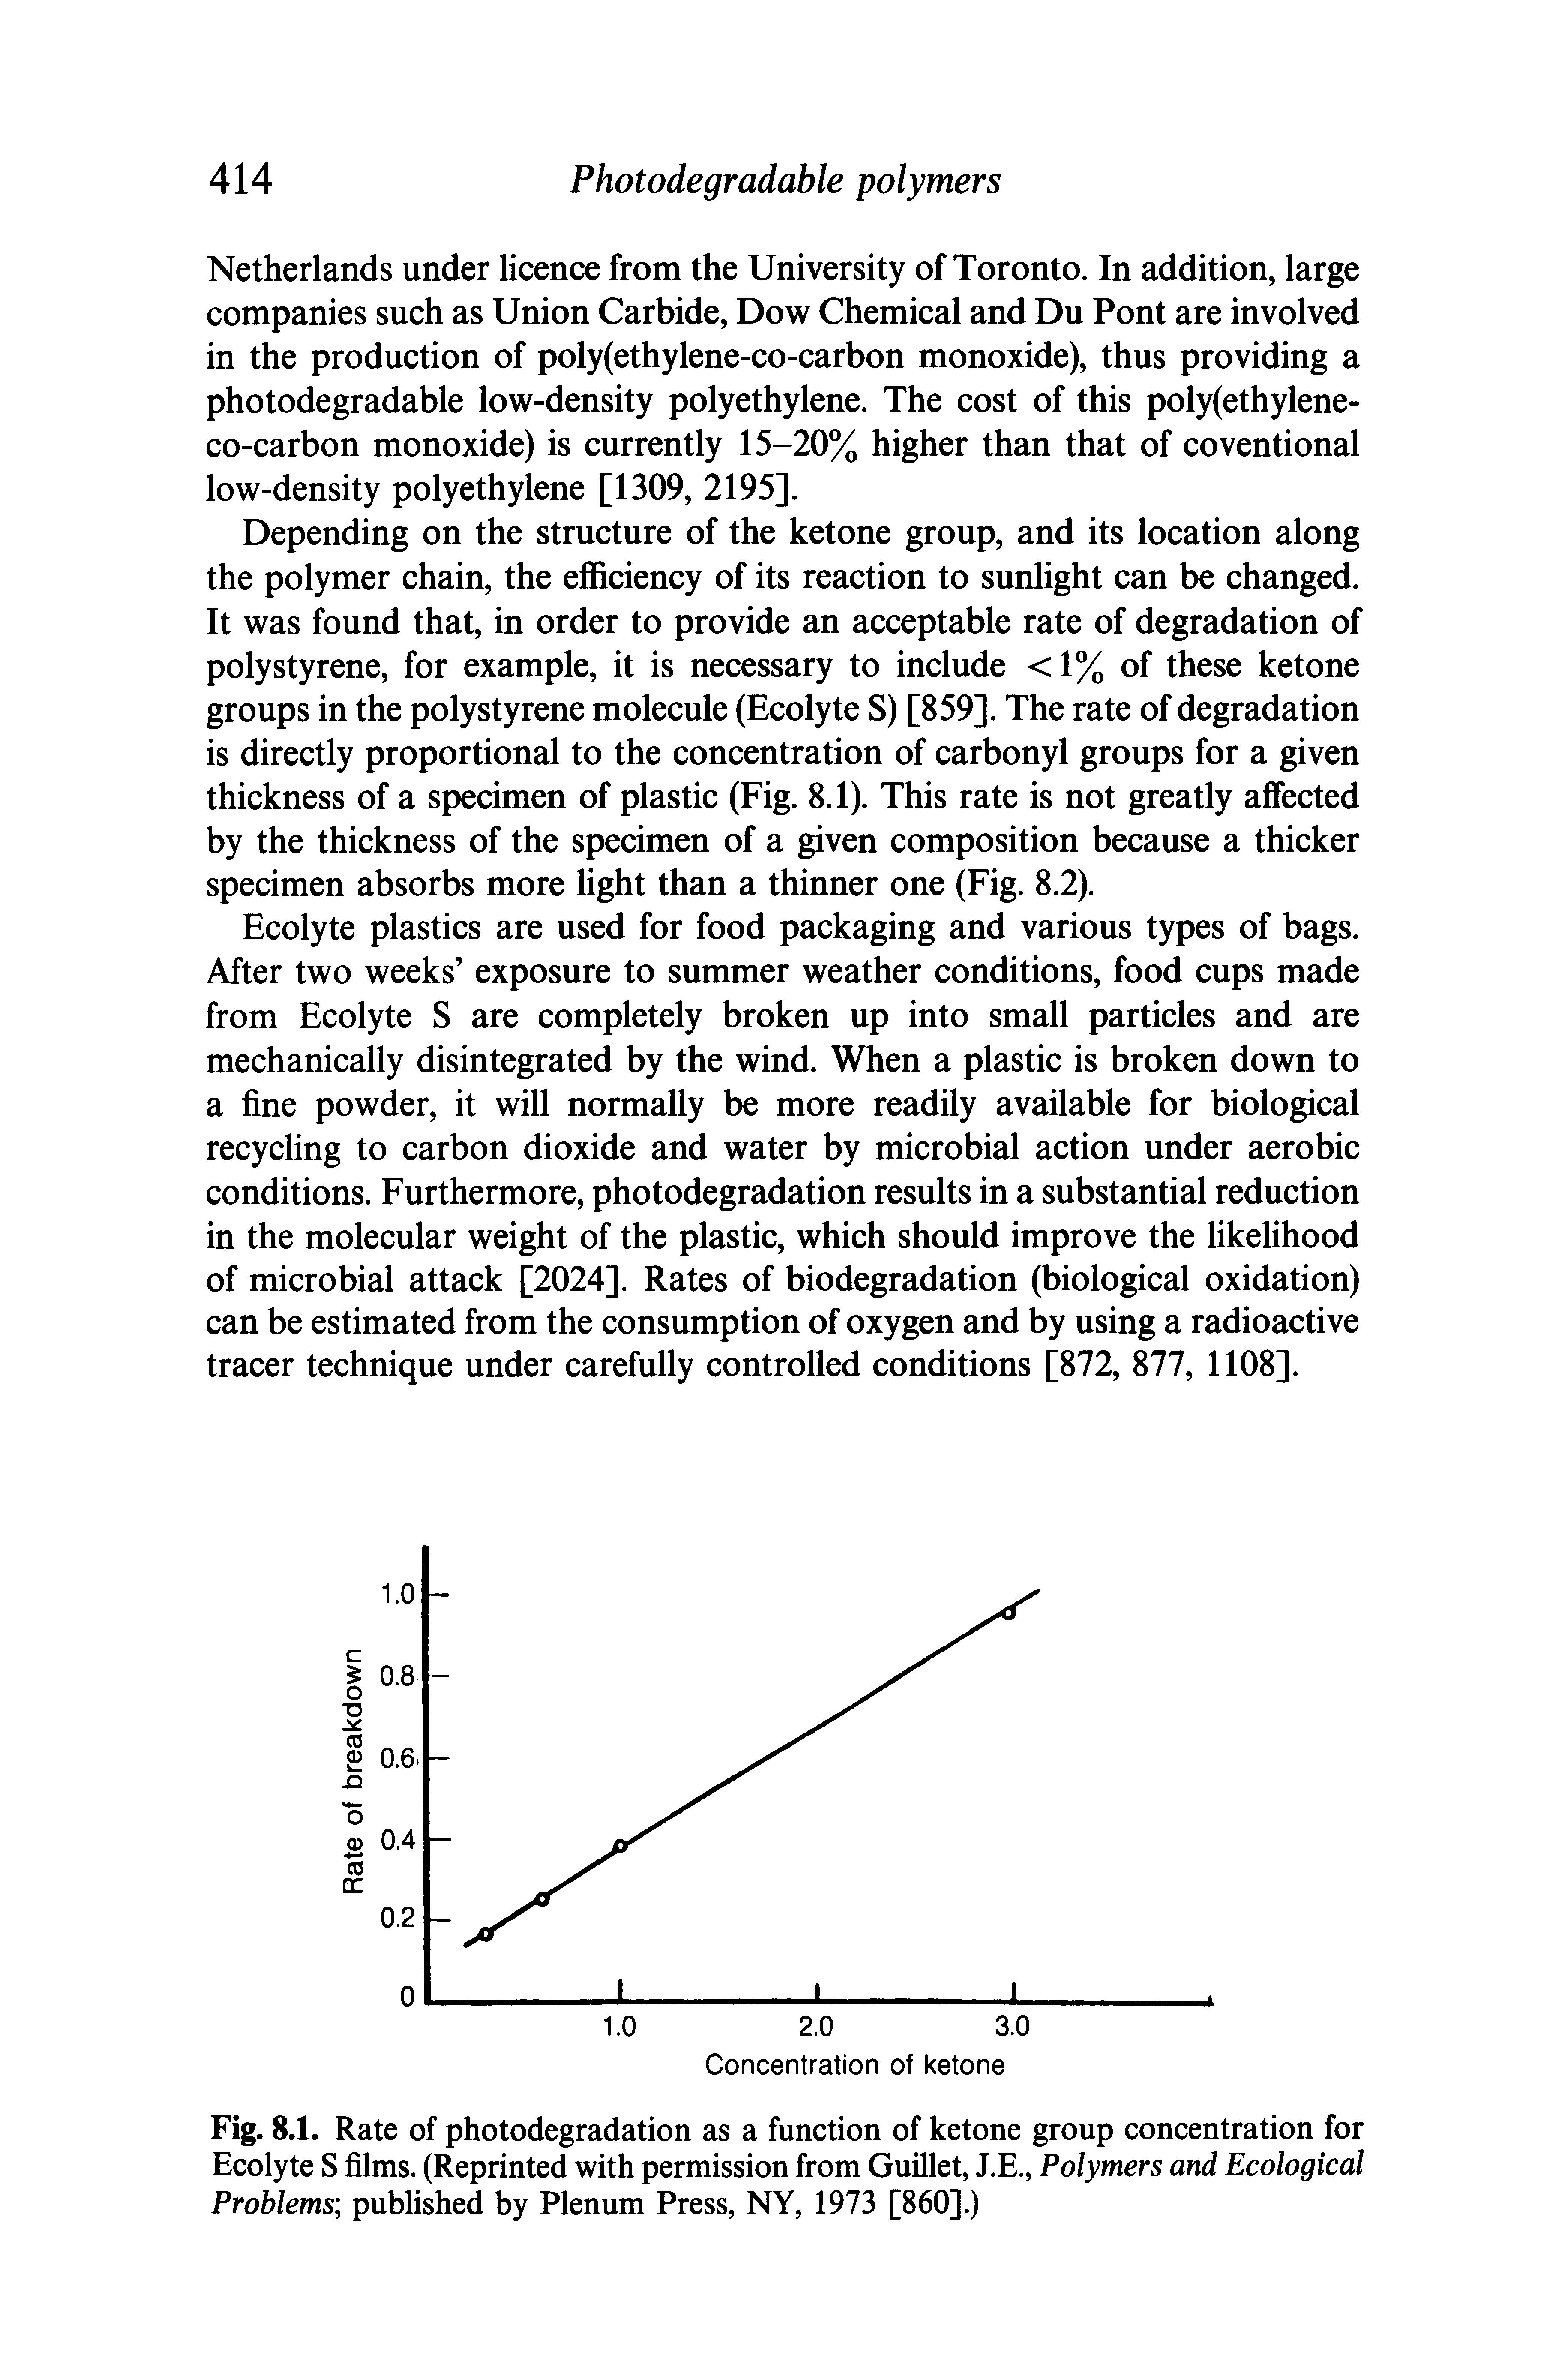 Fig. 8.1. Rate of photodegradation as a function of ketone group concentration for Ecolyte S films. (Reprinted with permission from Guillet, J.E., Polymers and Ecological Problems published by Plenum Press, NY, 1973 [860].)...